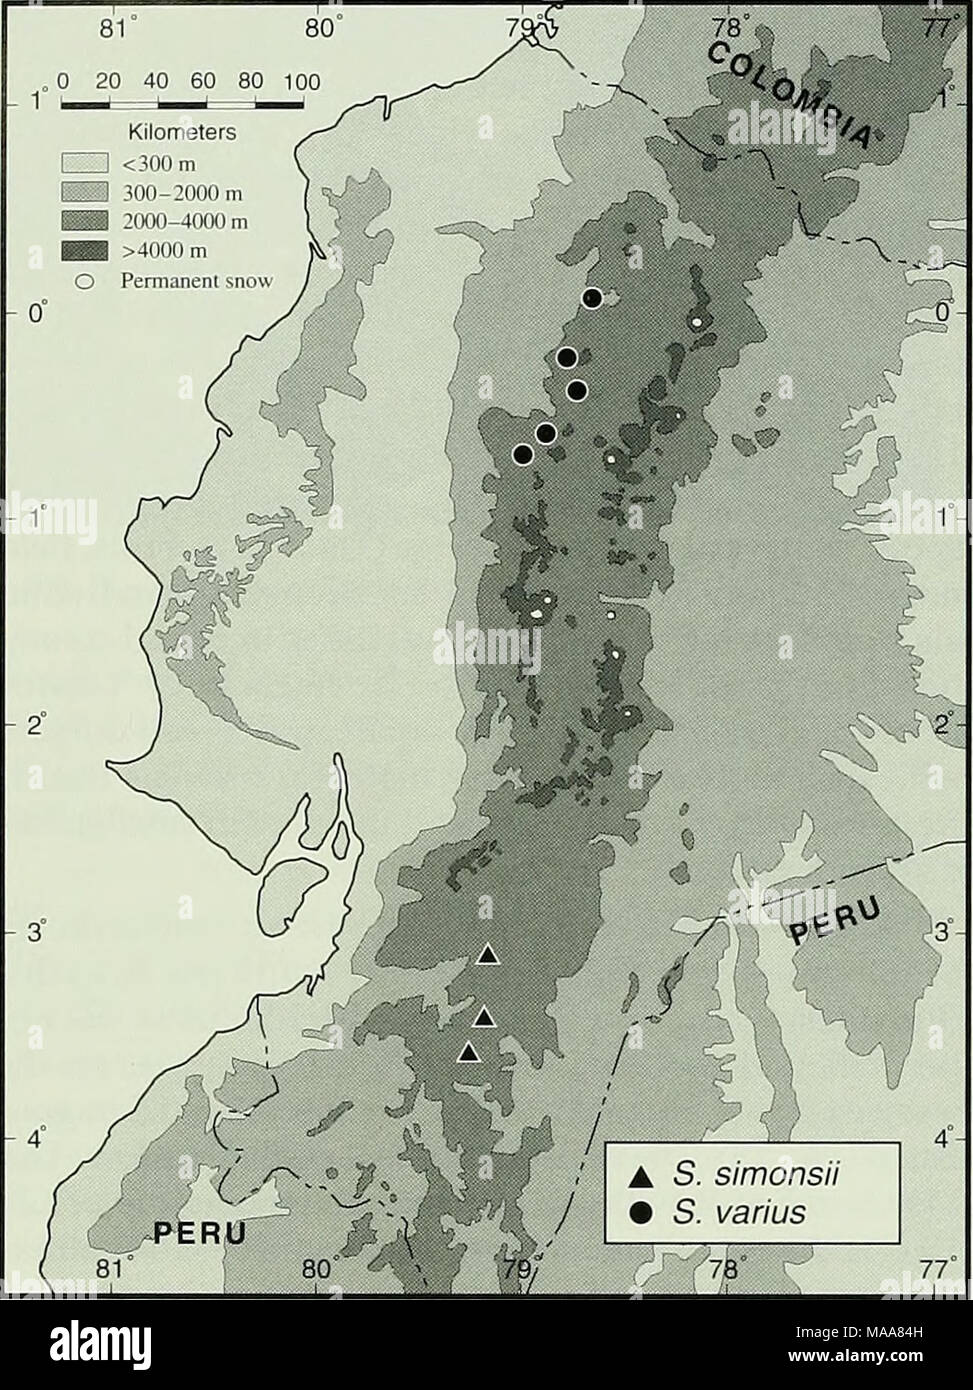 . Ecuadorian lizards of the genus Stenocercus (Squamata: Tropiduridae) . Fig. 19. Distribution of two species of Stenocercus in Ecuador. slightly compressed laterally; (18) gular region of males not black; (19) dorsum bluish gray or green. Stenocercus varius differs from other species of Stenocercus by the combination of smooth ventrals, granu- lar scales on posterior surface of thigh, distinct vertebral crest, 3 caudal whorls per autotomic segment, caudal scales without projecting spines, posthumeral pocket Type 1, postfemoral pocket Type 1 or 2, and 74-88 scales around midbody. Description a Stock Photo